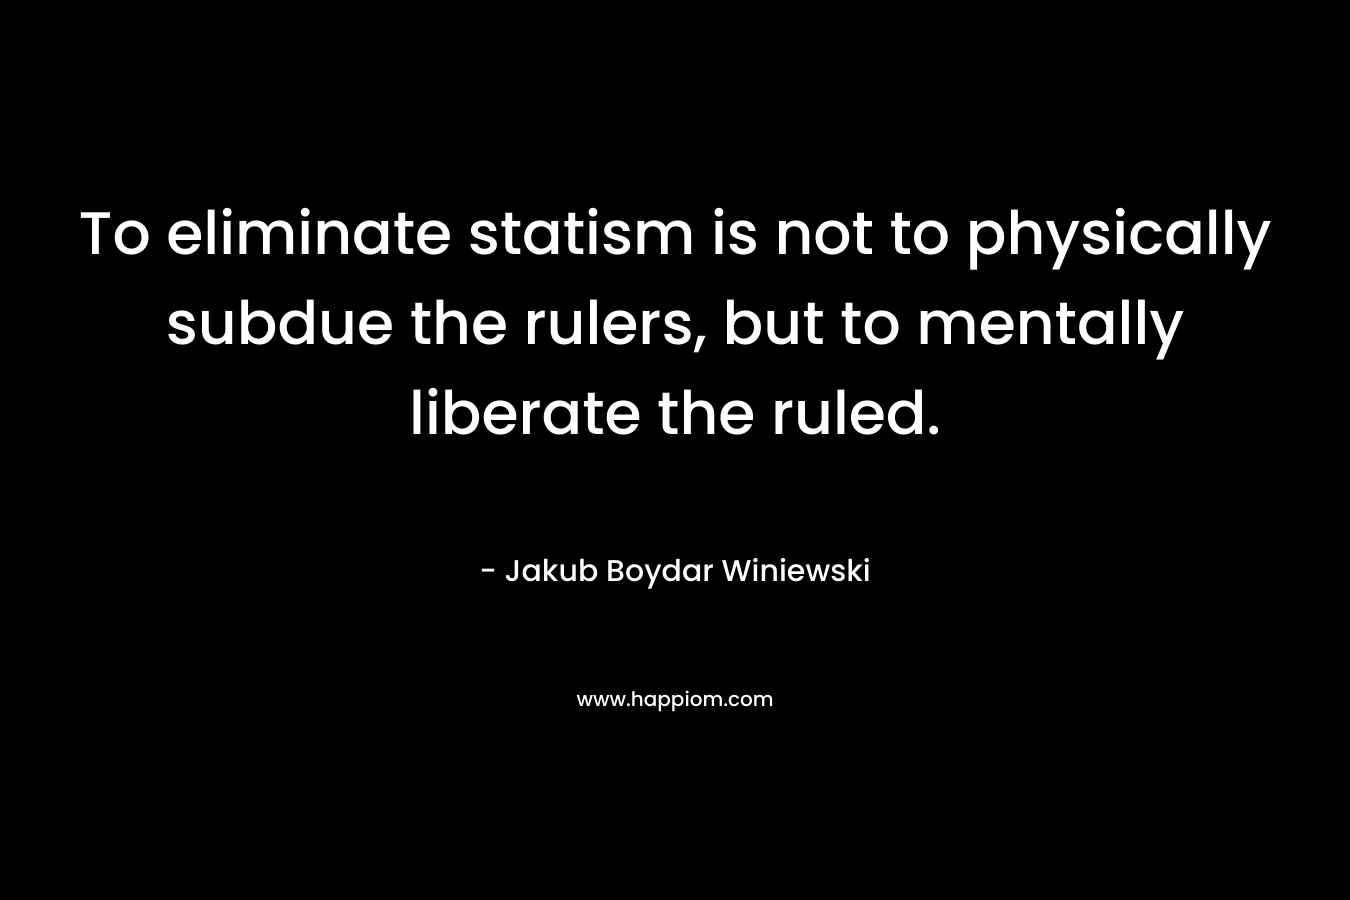 To eliminate statism is not to physically subdue the rulers, but to mentally liberate the ruled. – Jakub Boydar Winiewski